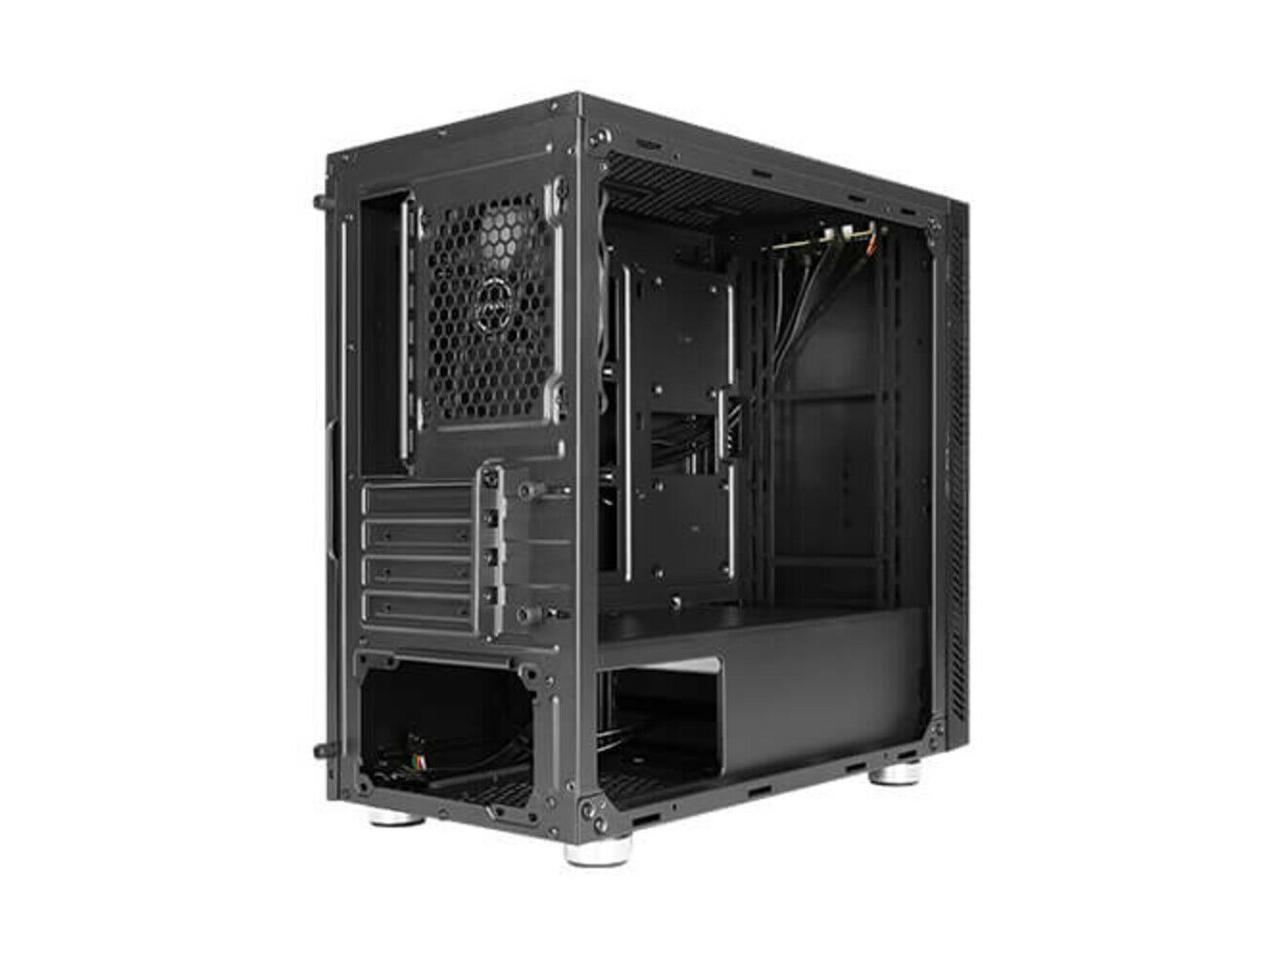 Antec VSK10 Case Solid Panel Micro Tower USB3.0x2 4xExpansion Slots mATX/ITX